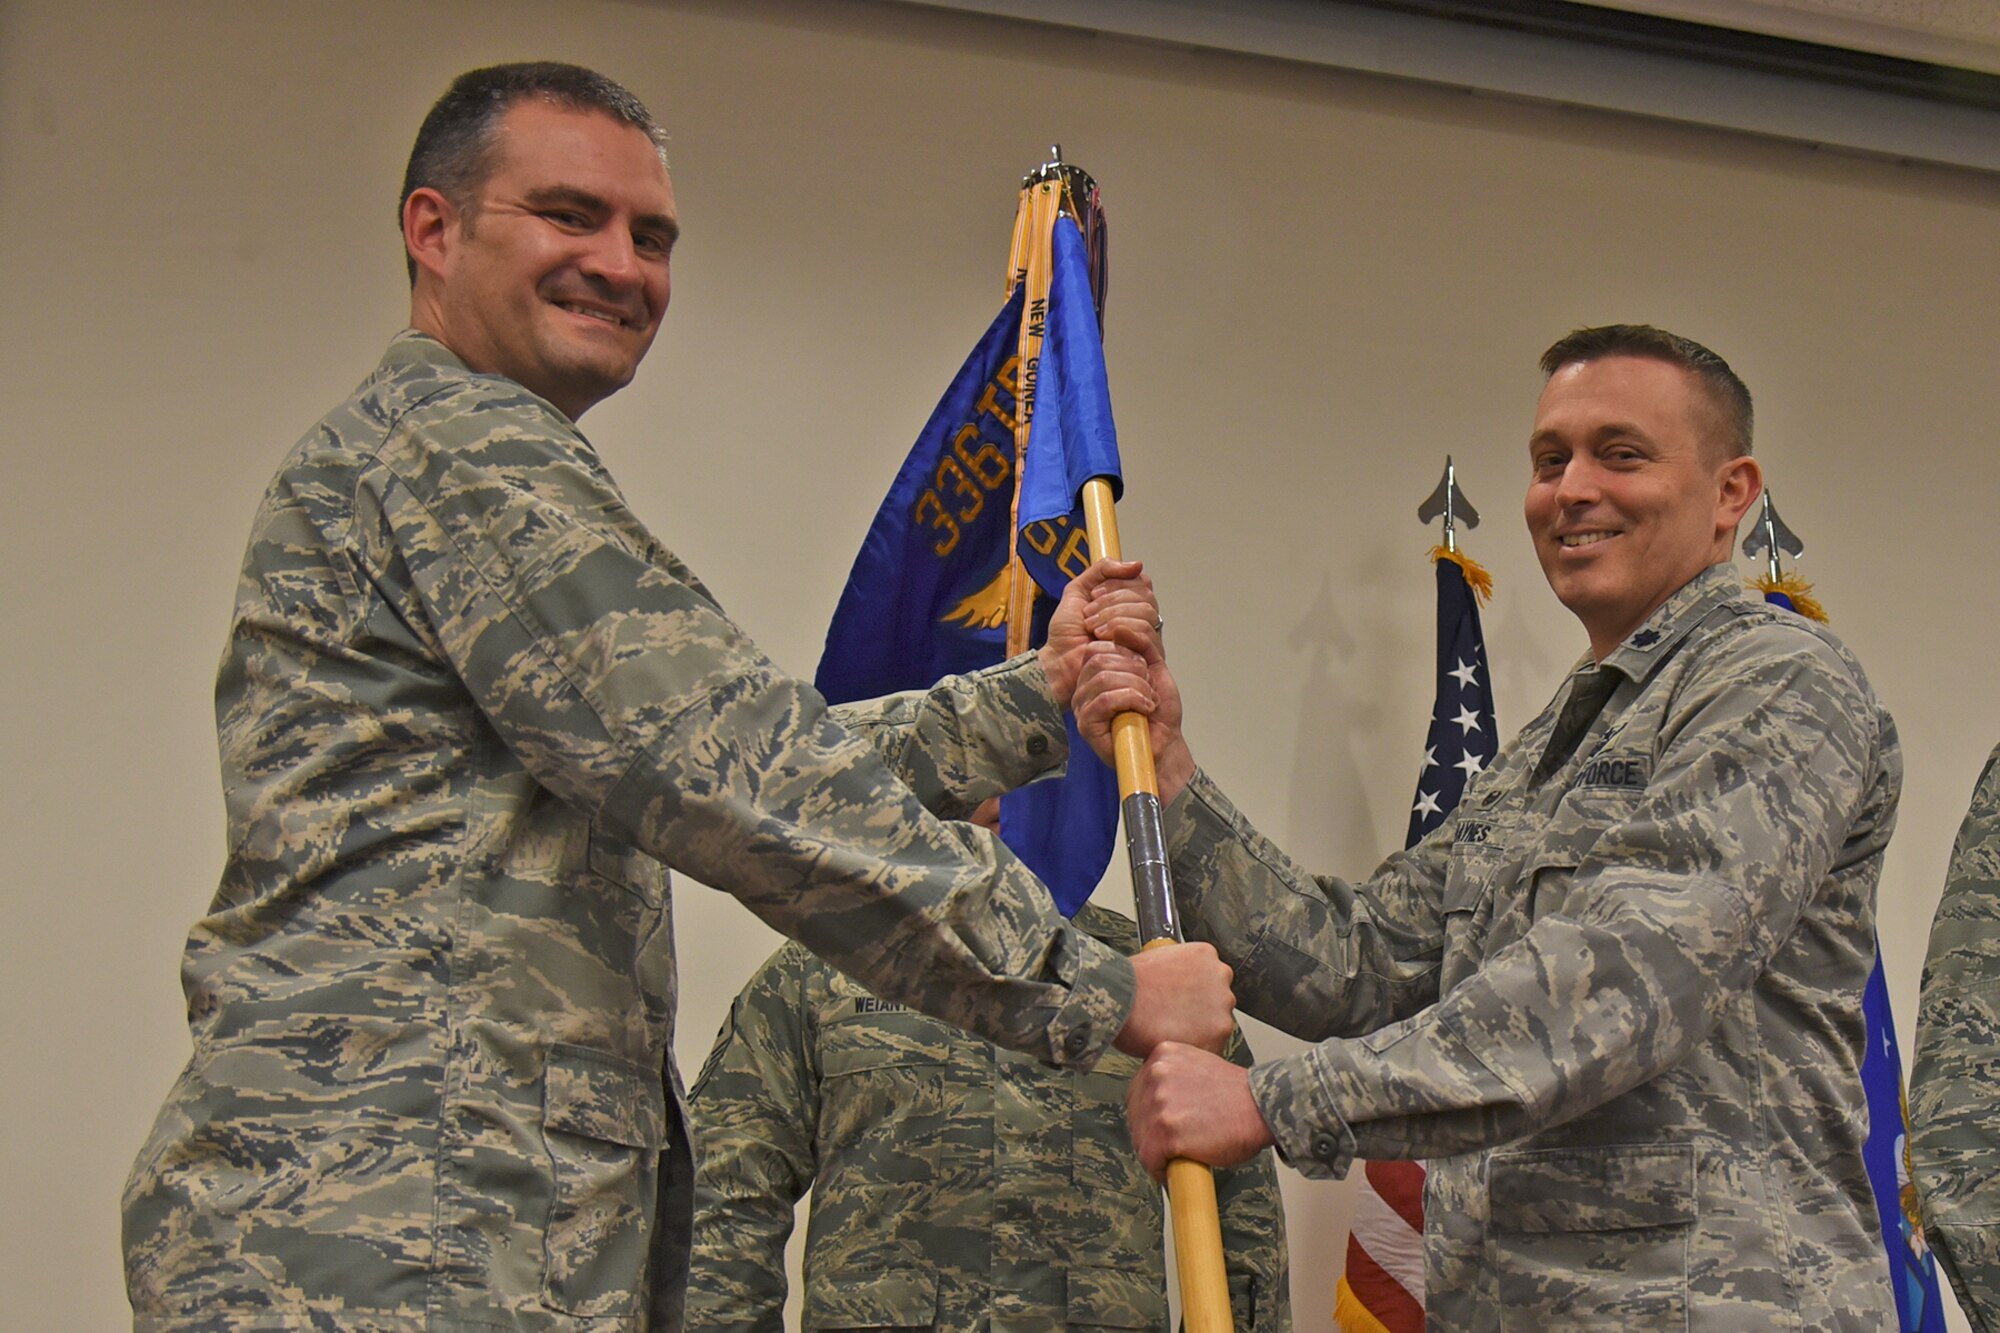 Lt. Col. Erik Haynes assumed command of the 66th Training Squadron from Lt. Col. David C. Rea during a ceremony Apr. 10, 2017, at Fairchild Air Force Base, Washington. Haynes assumes command after calling Fairchild home for two years as the 66th TRS operations officer, under the command of Lt. Col. David Rea. 
